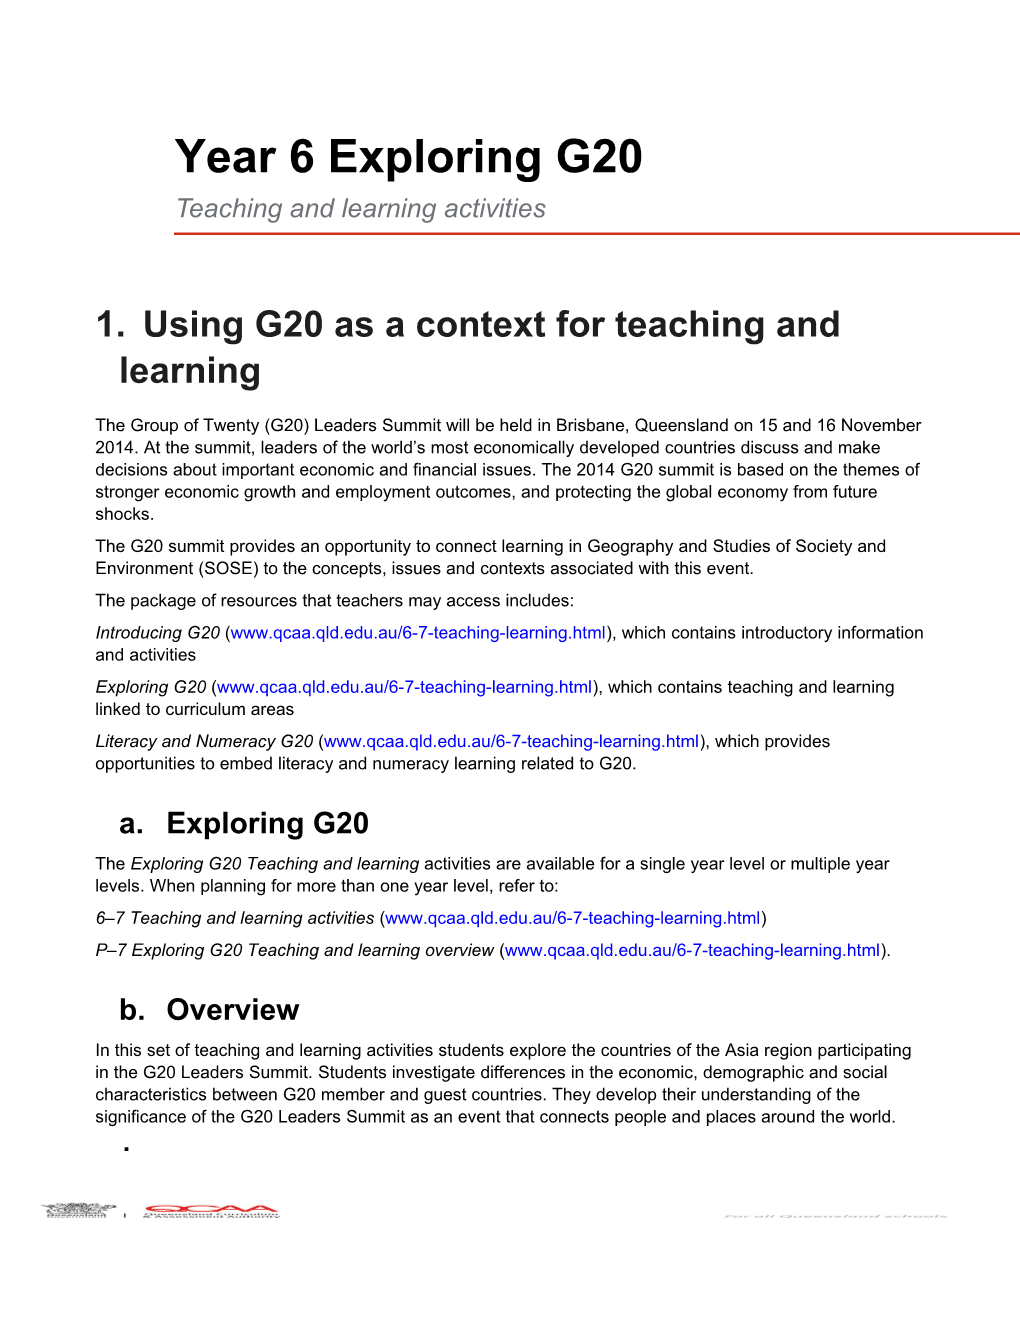 Year 6 Exploring G20: Teaching and Learning Activities